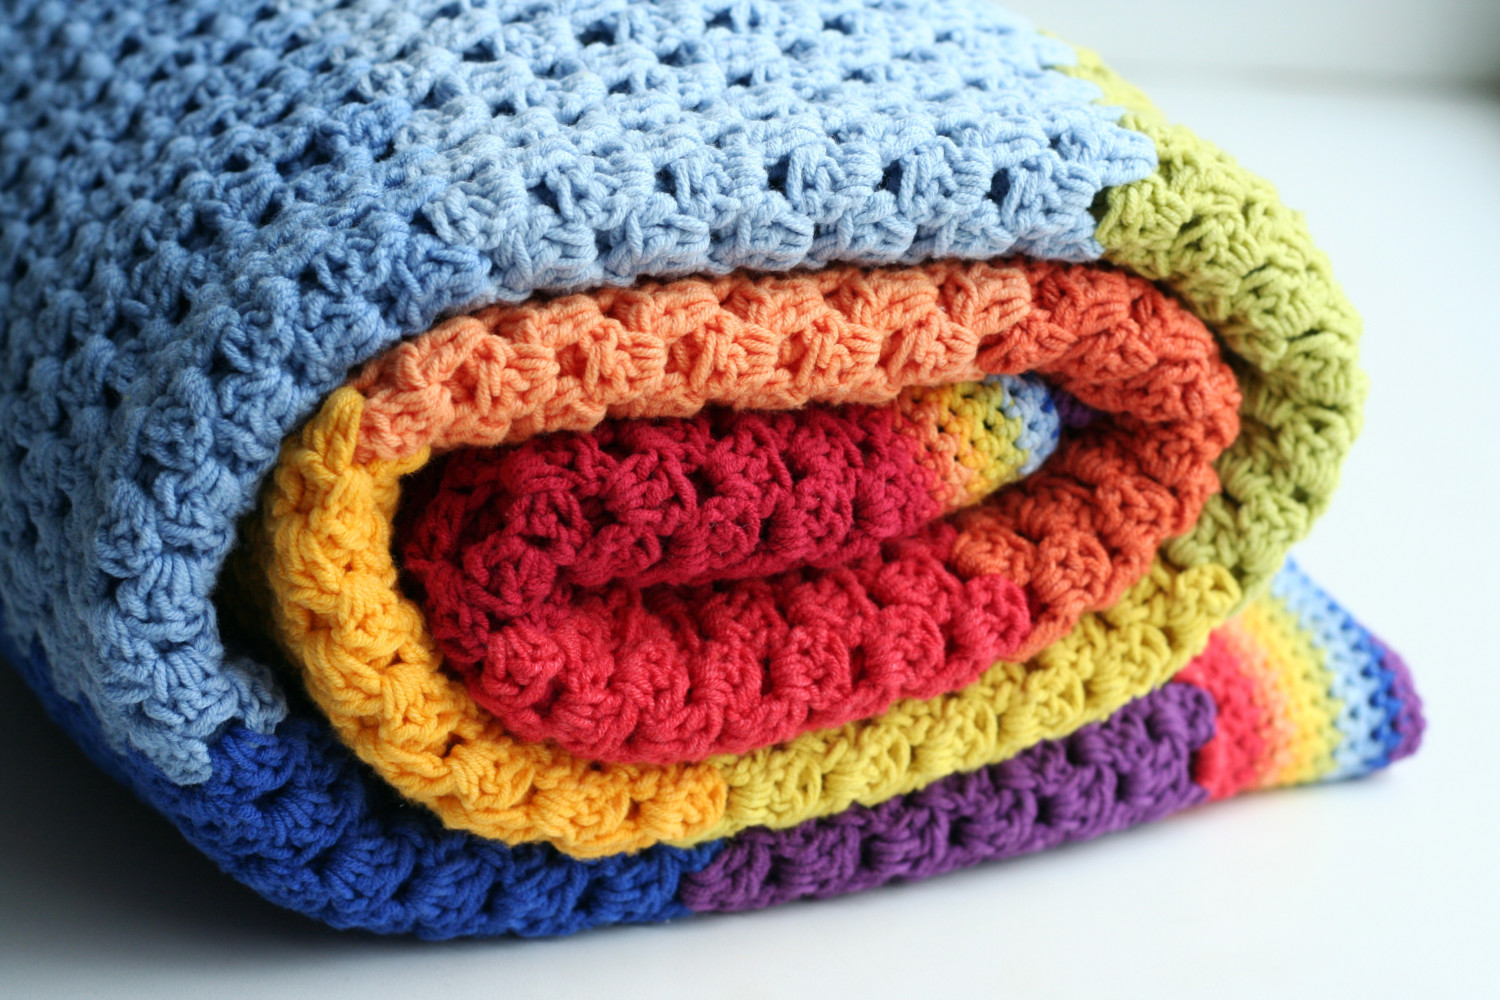 A rainbow crocheted blanket rolled up.